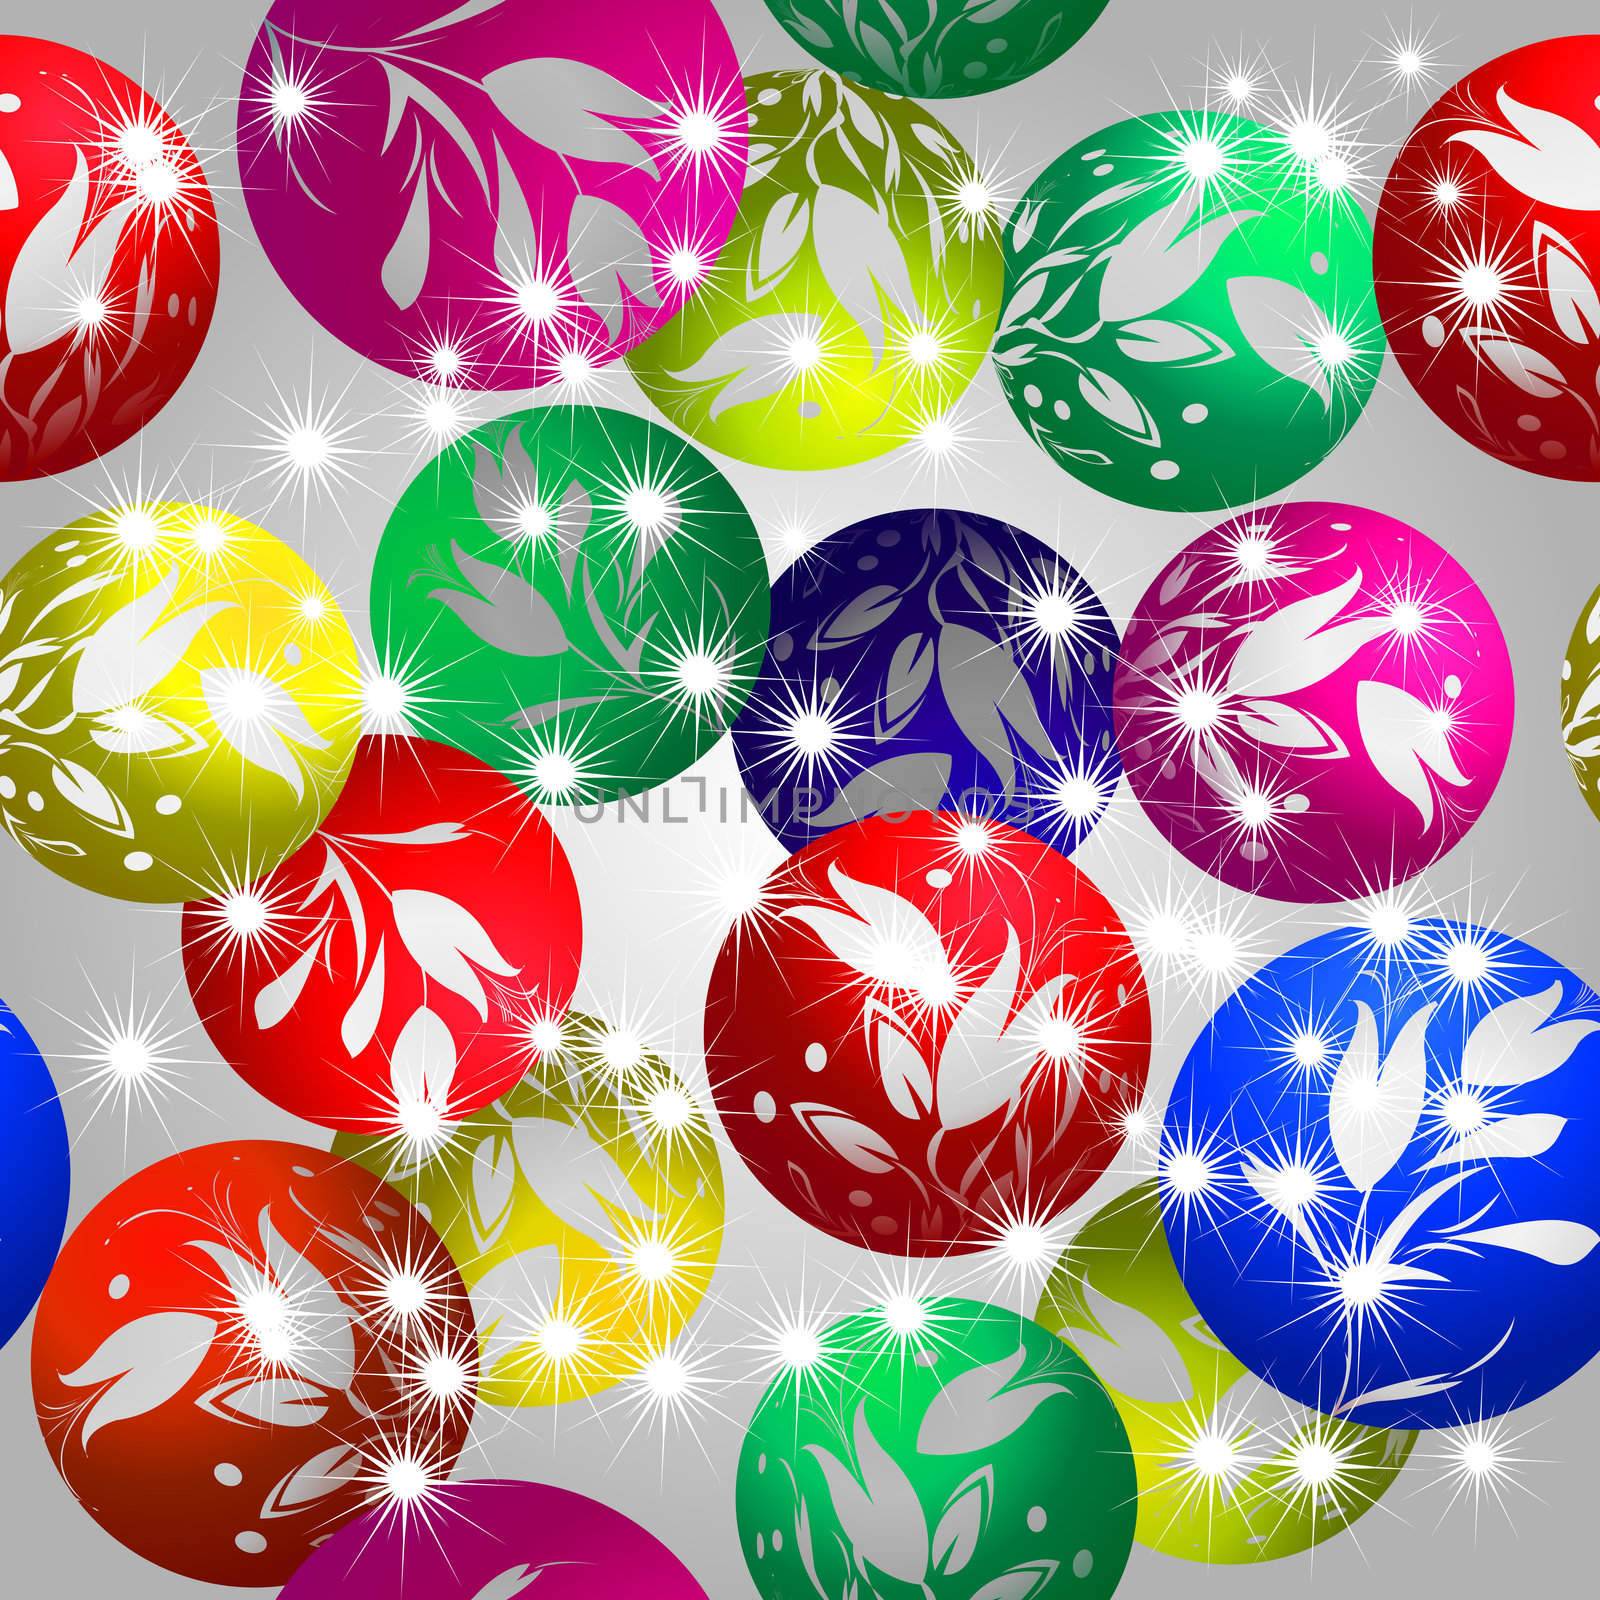 Christmas baubles design by Lirch